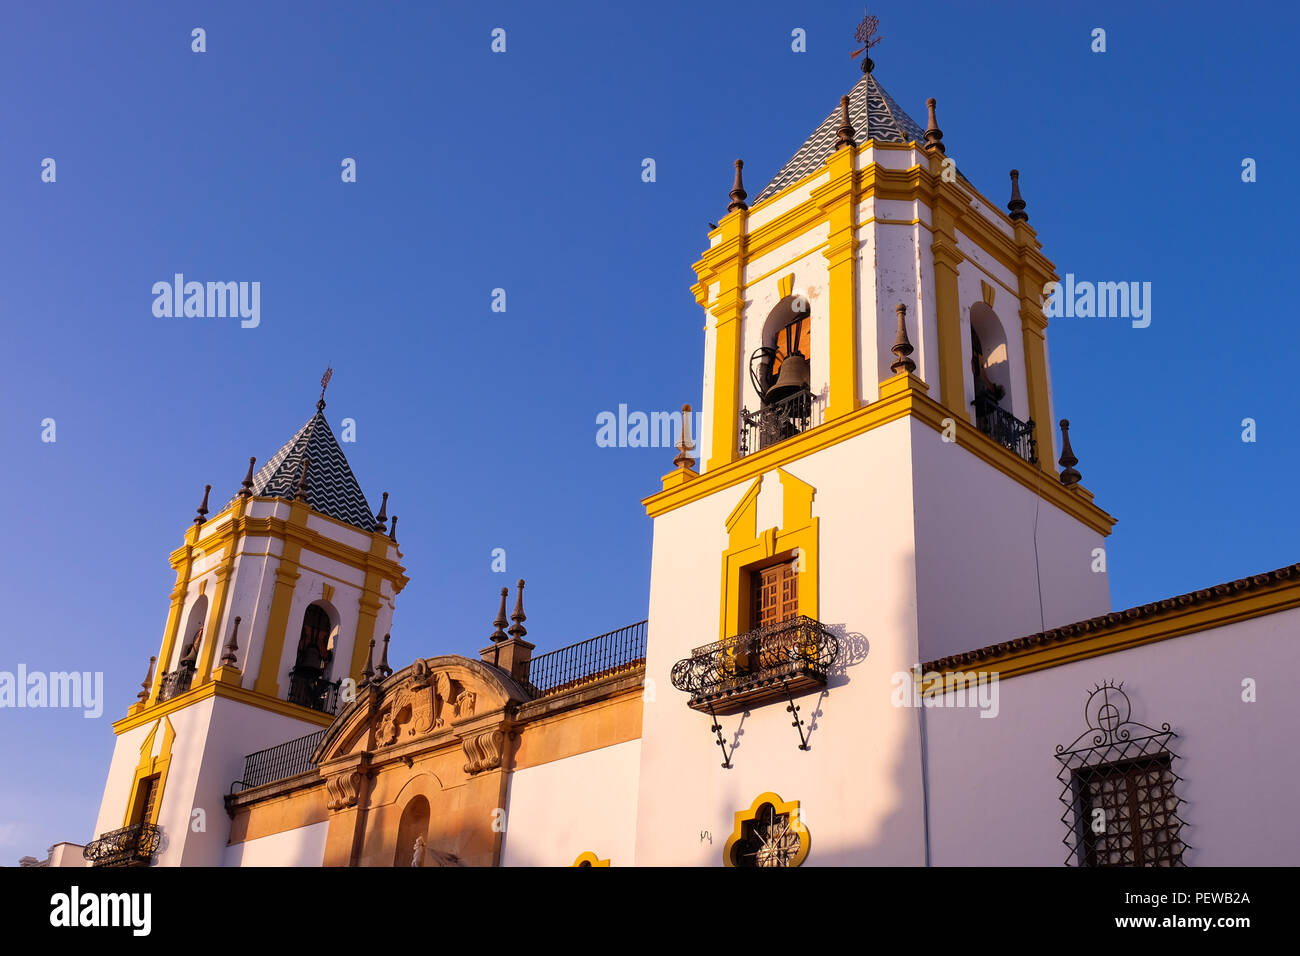 Landscape view of the Church of Socorro in Ronda, with the two bell towers in the foreground and deep blue sky in the background Stock Photo